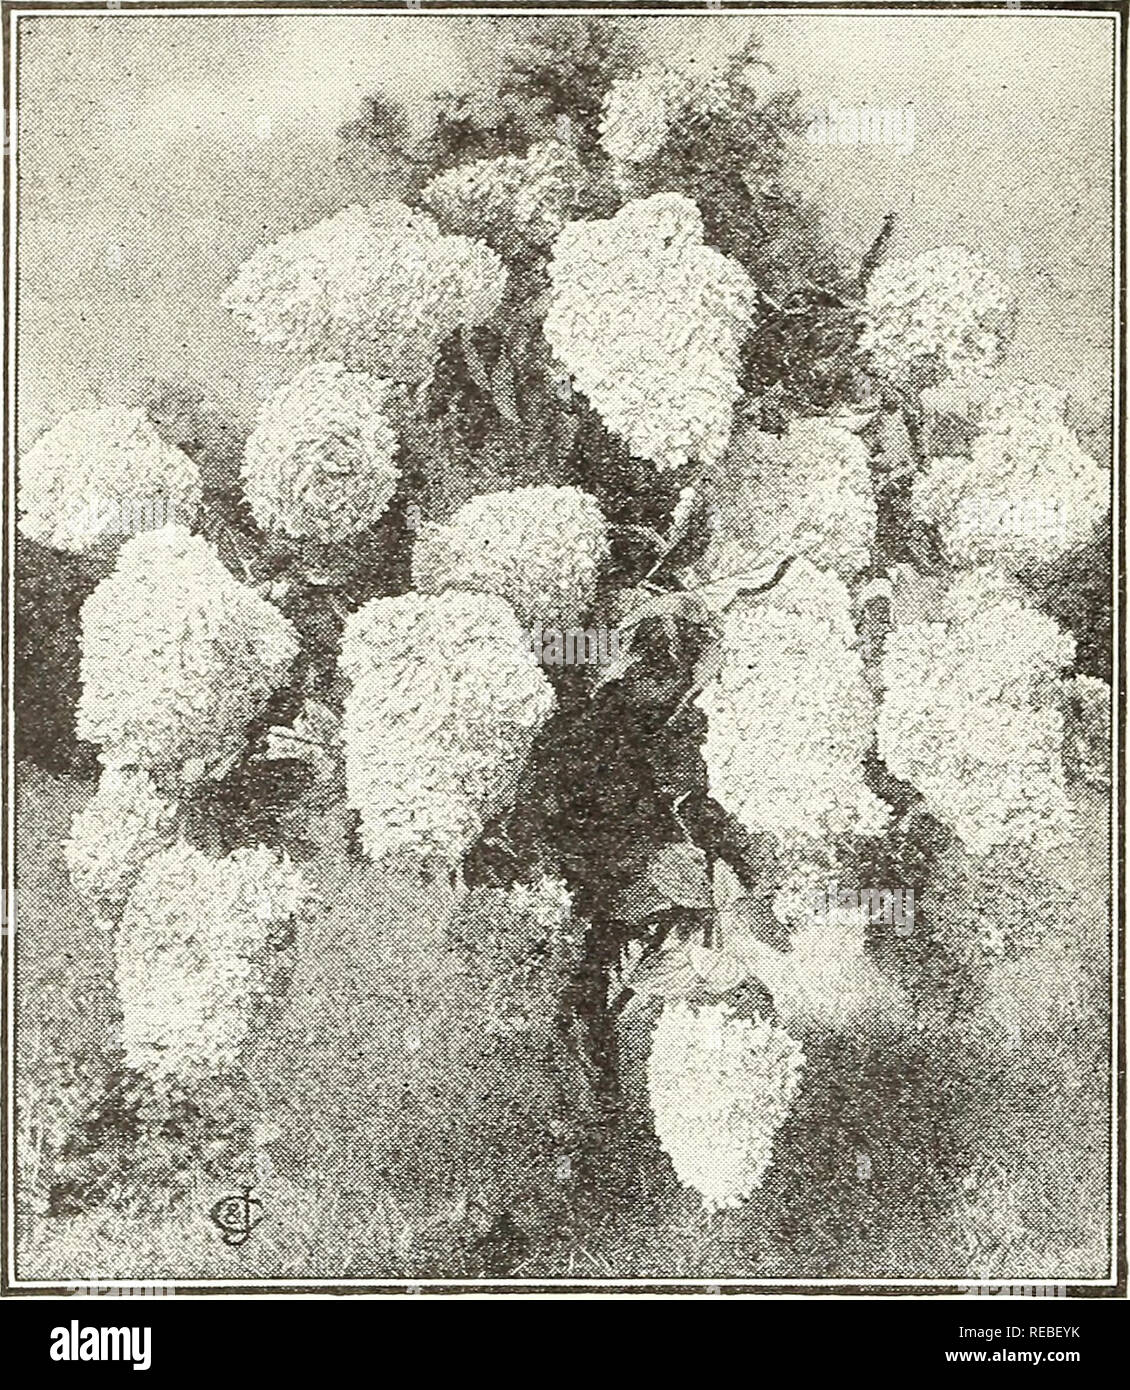 . Conard star roses : autumn 1923. Rose culture; Roses; Flowers Seeds Catalogs; Plants, Ornamental Seeds Catalogs. THE CONARD &amp;â JONES CO., WEST GROVE, PA. ROBERT PYLE, PRESIDENT ANTOINE WINTZER, Vice-President Hardy Ornamental Flowering Shrubs SEE PRICES AT FOOT OF THE PAGE. Hydrangea paniculata grandiflora. Blooms for 3 months Forsythia viridissima (Golden Bells) The earliest blooming shrub, coming into flower early in May, and the entire plant becomes covered with golden yellow, bell-shaped flowers before the foliage appears. The bright yellow blossoms are a grateful sight in early spri Stock Photo